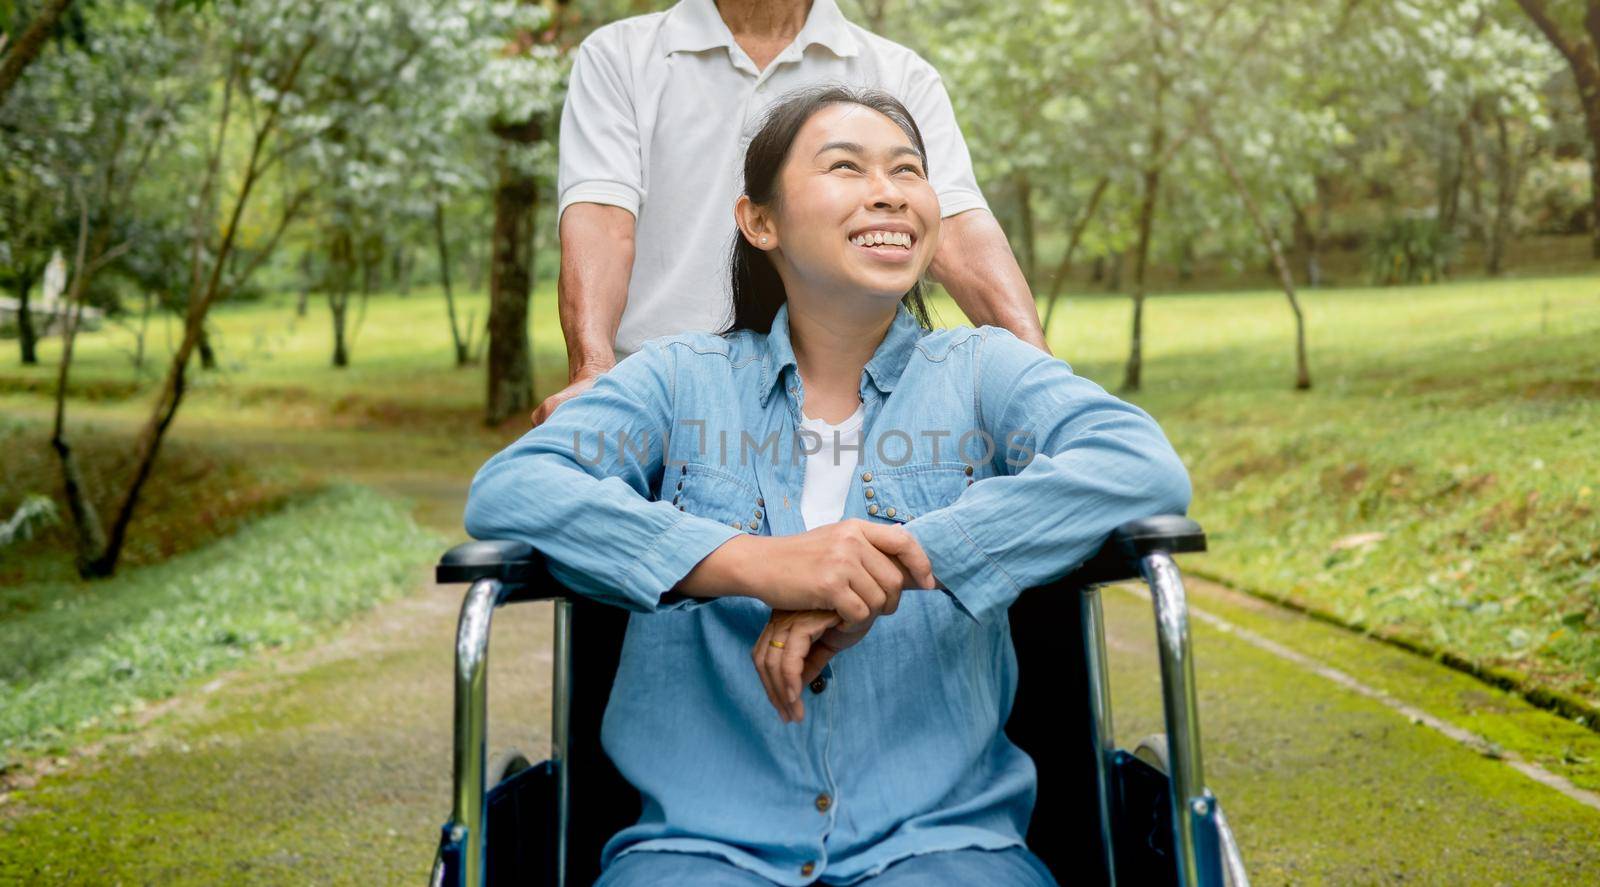 Happy senior man in a wheelchair enjoying nature in the park.